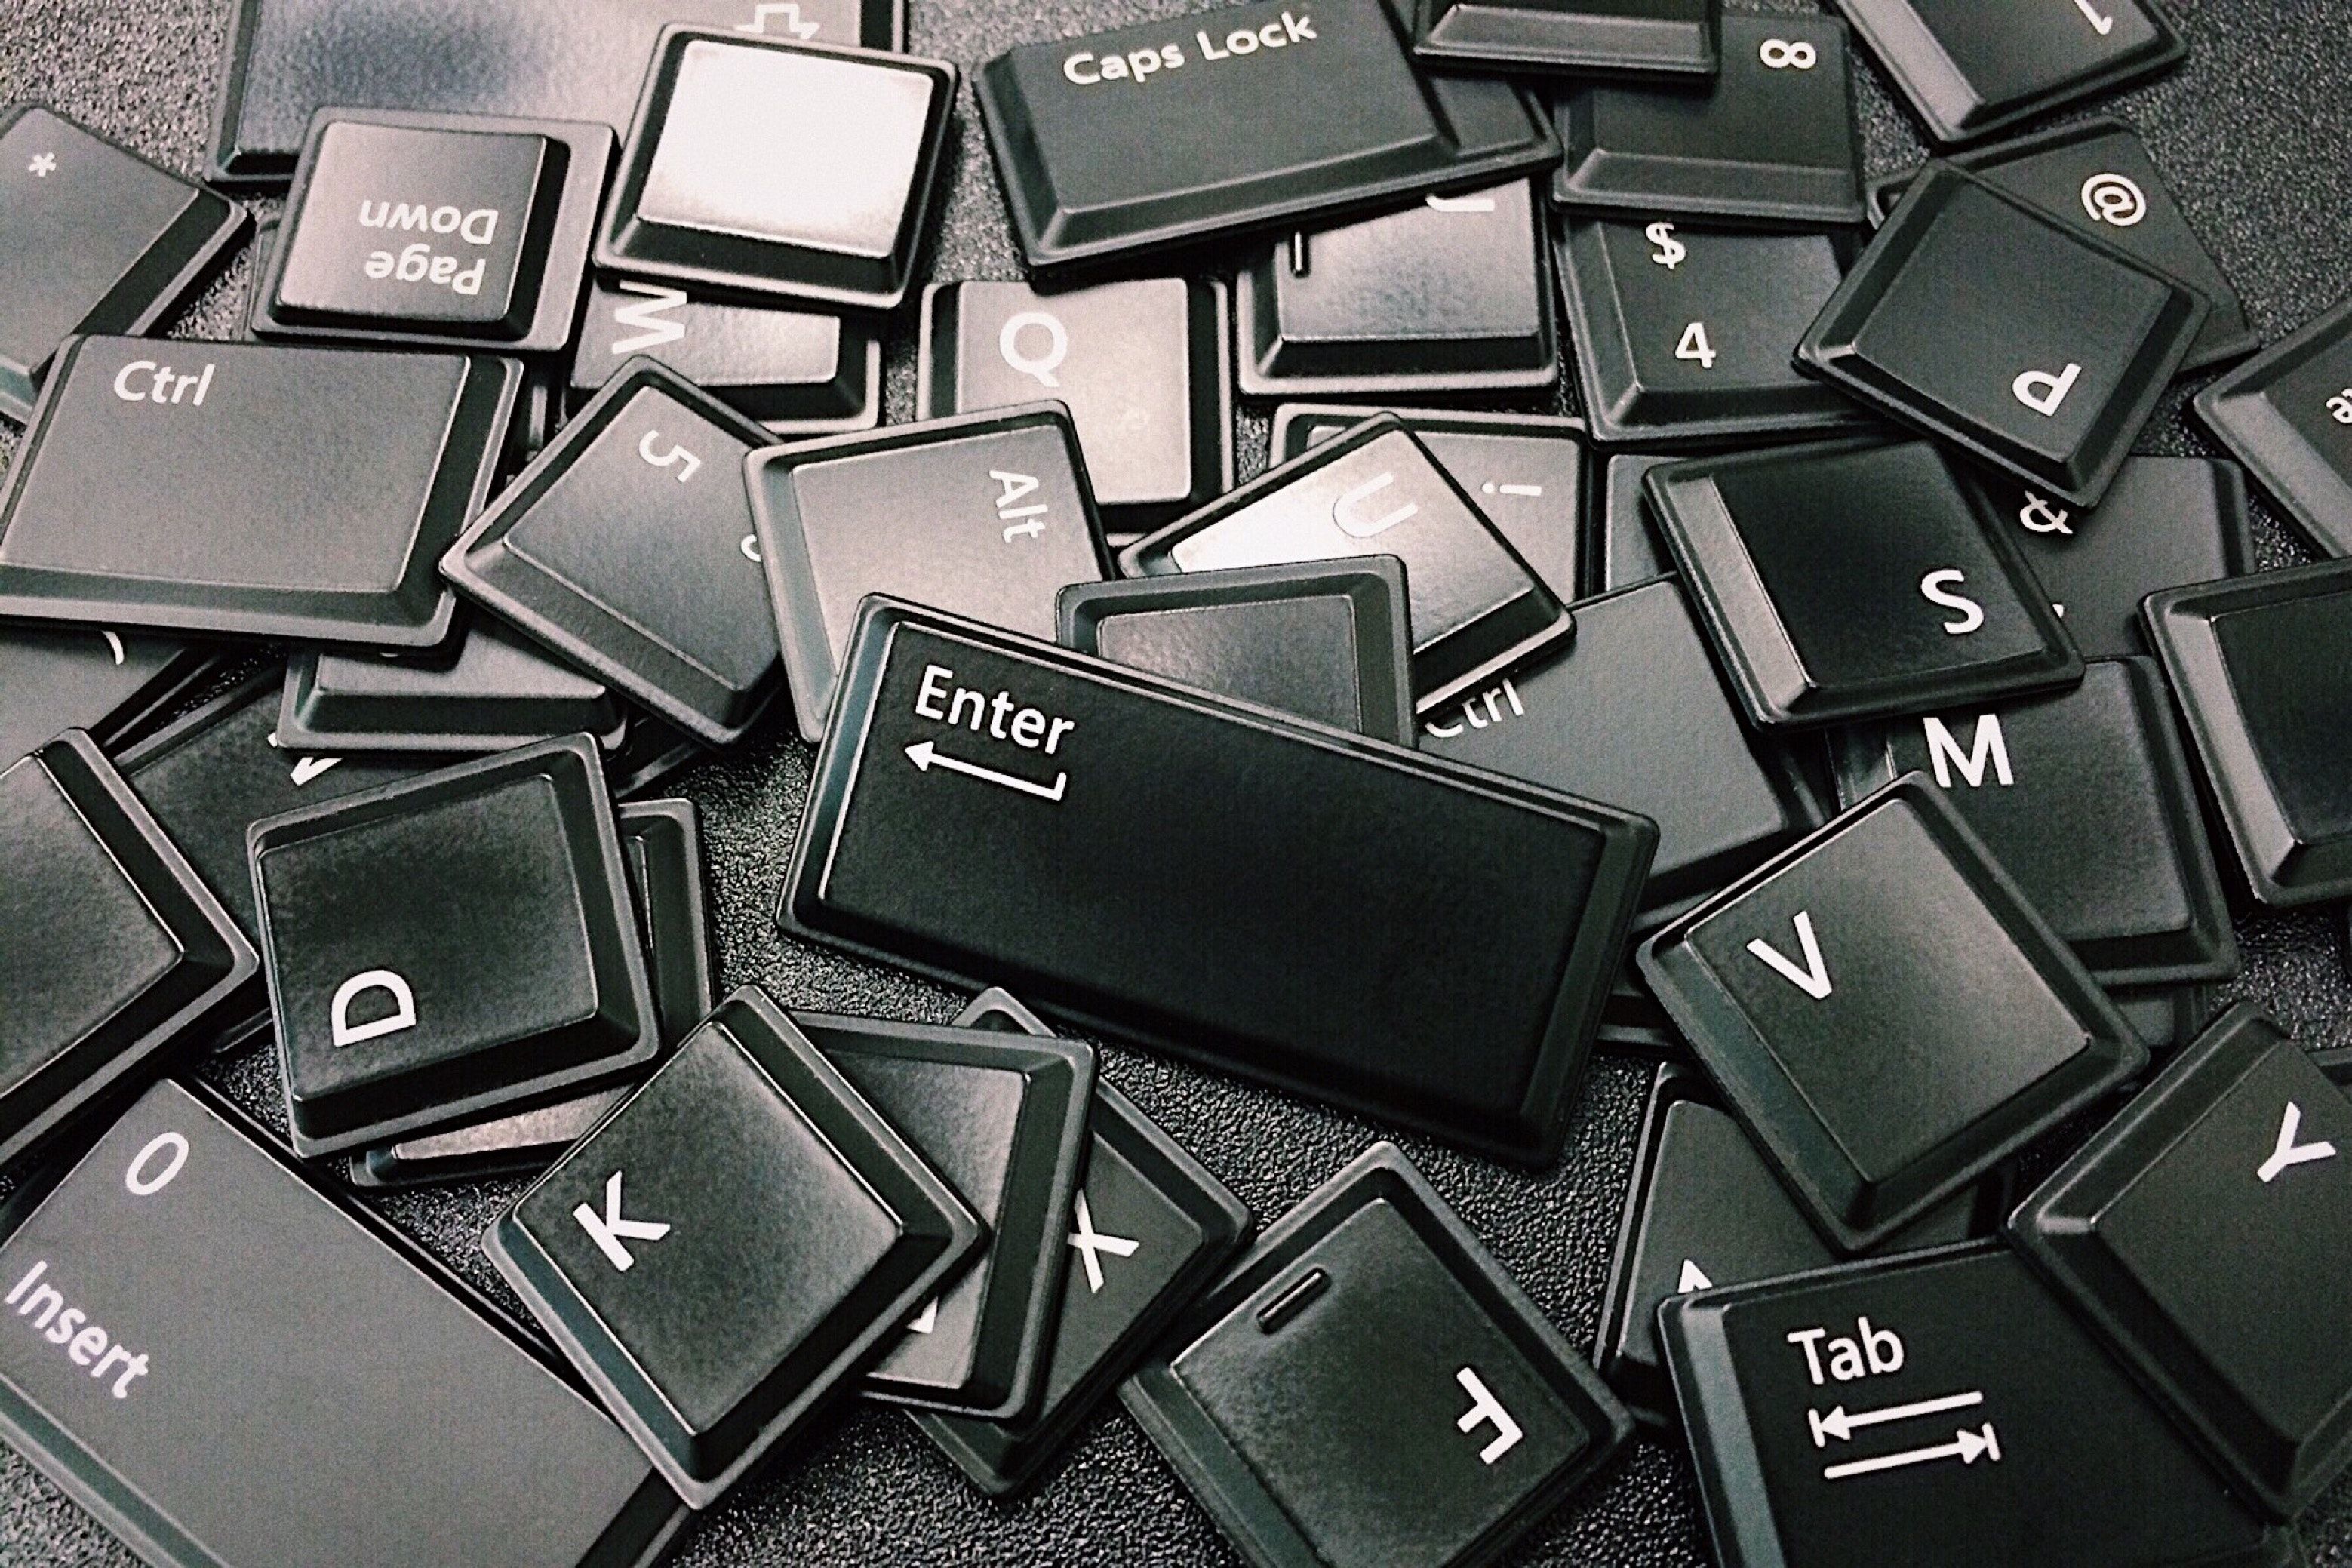 Keycaps in a pile